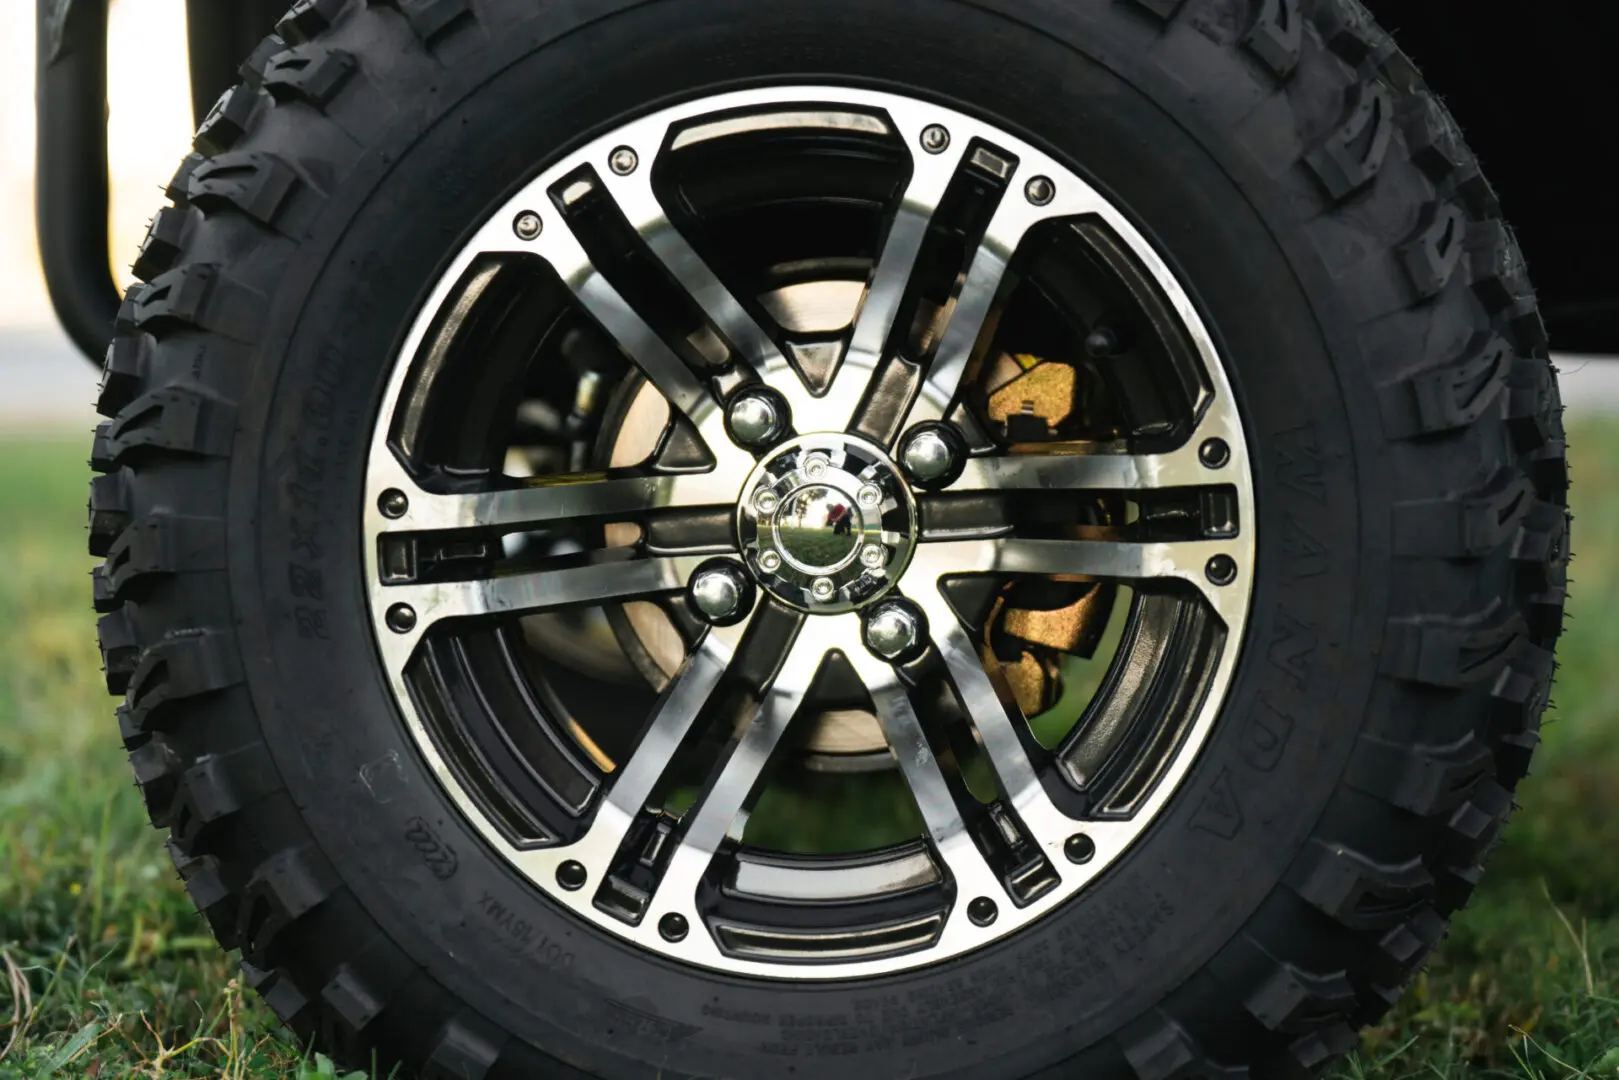 A close up of the rim and tire on a wheel.